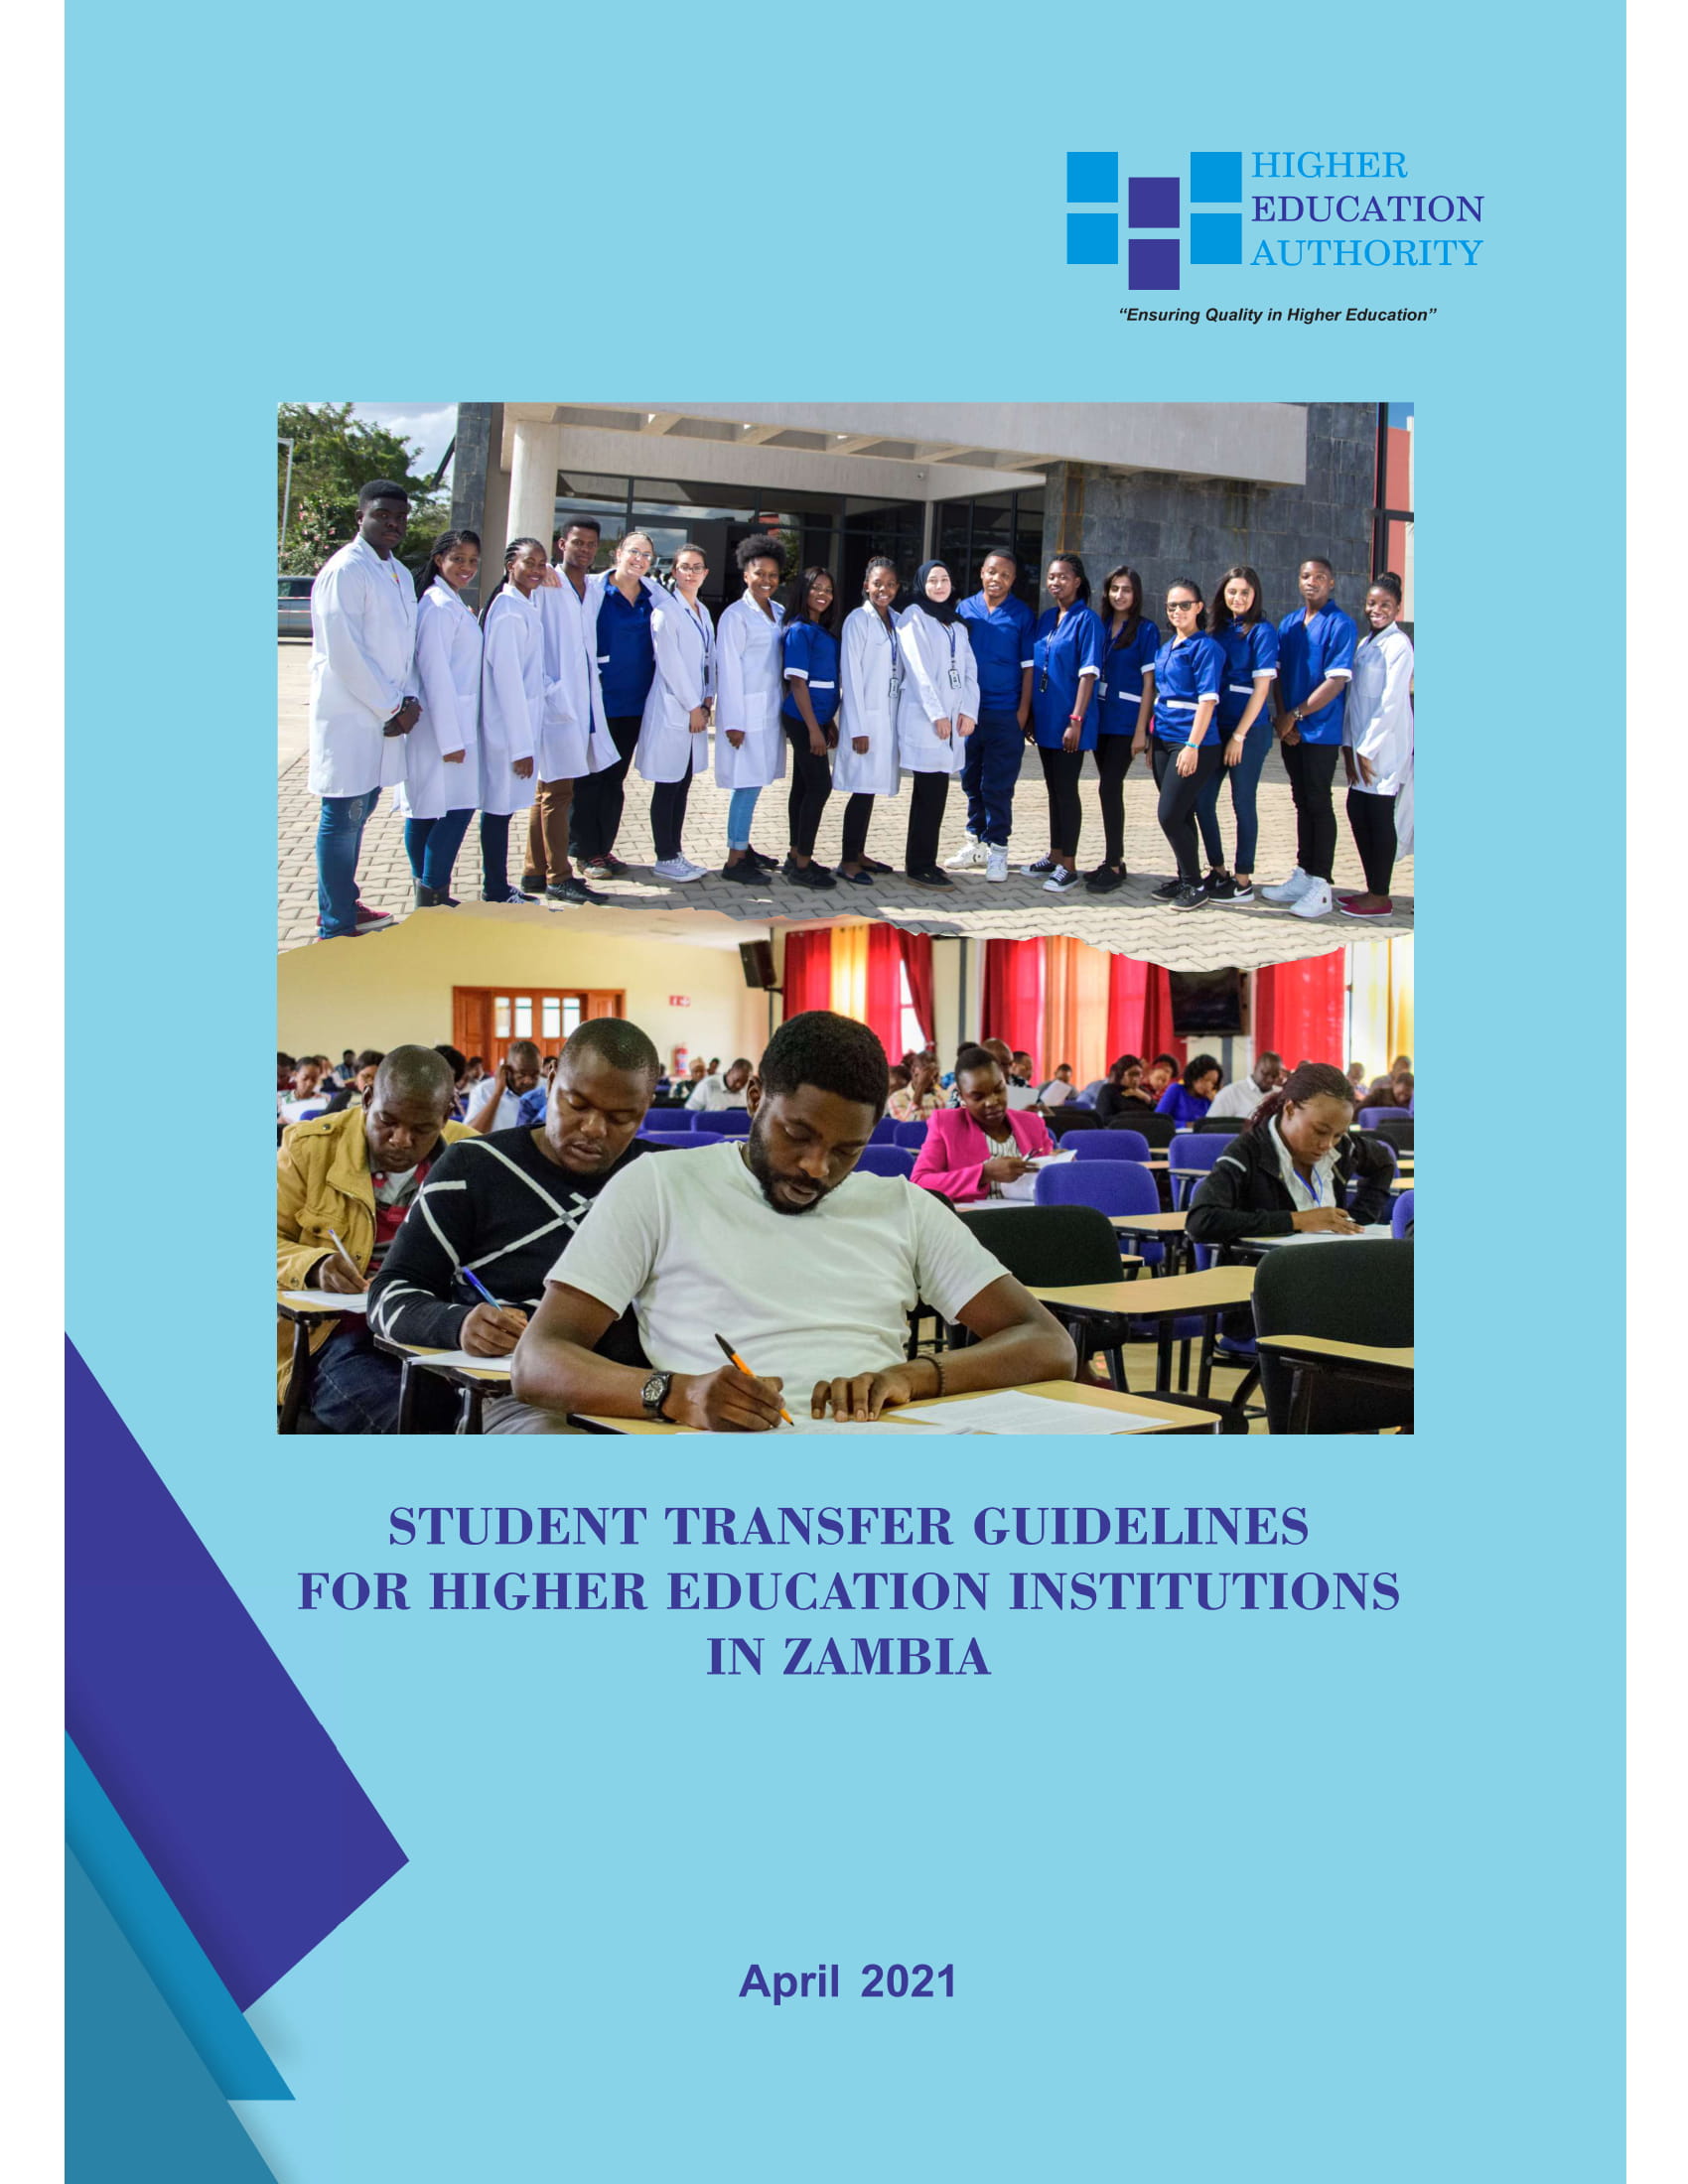 Student Transfer Guidelines for Higher Education Institutions in Zambia